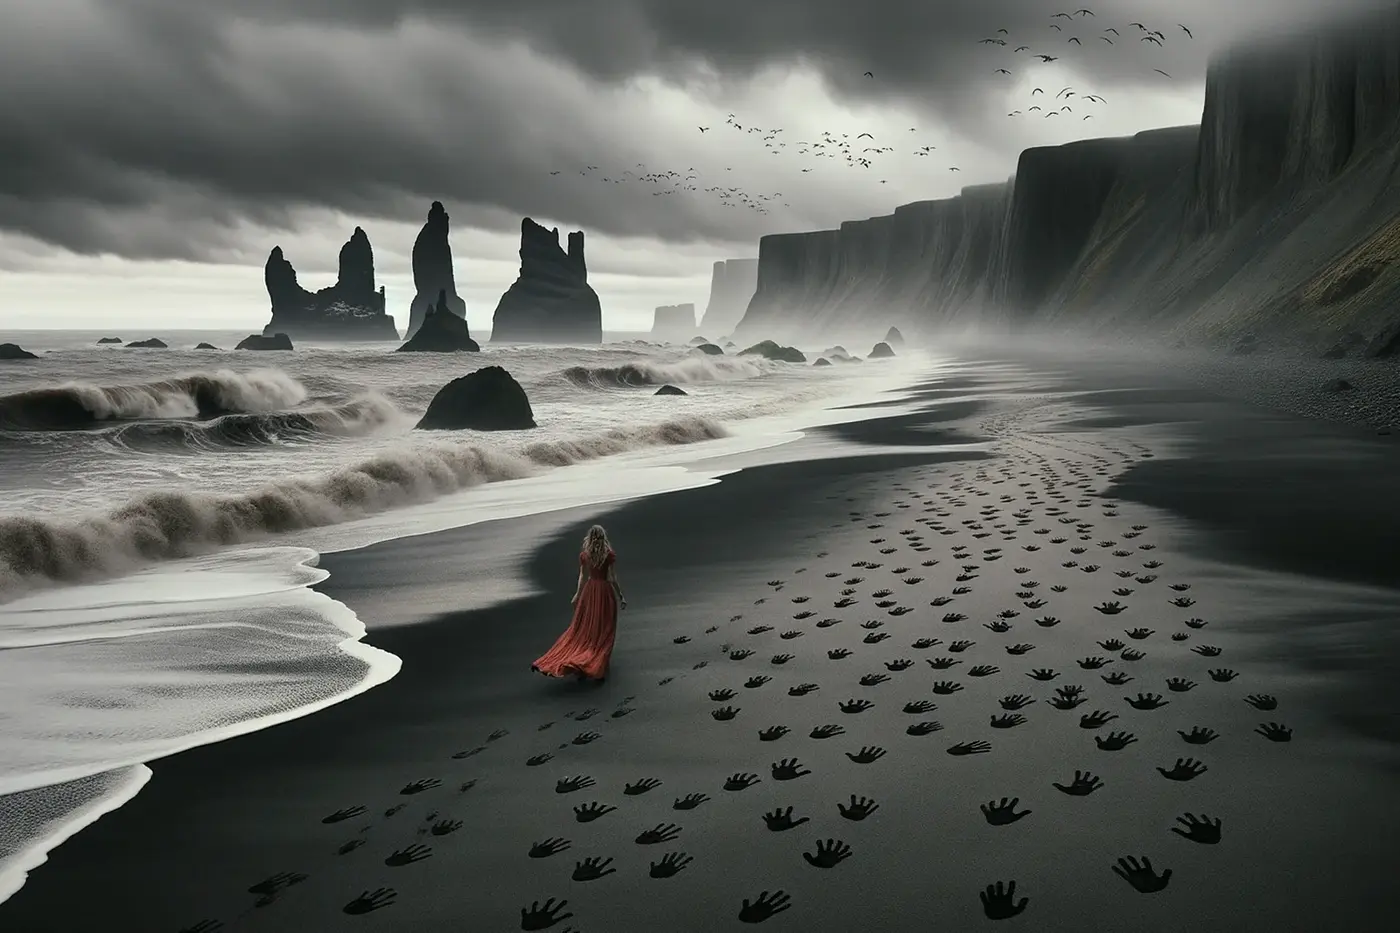 A blonde-haired woman walking across a gray beach. Inspired by the video game Death Stranding.